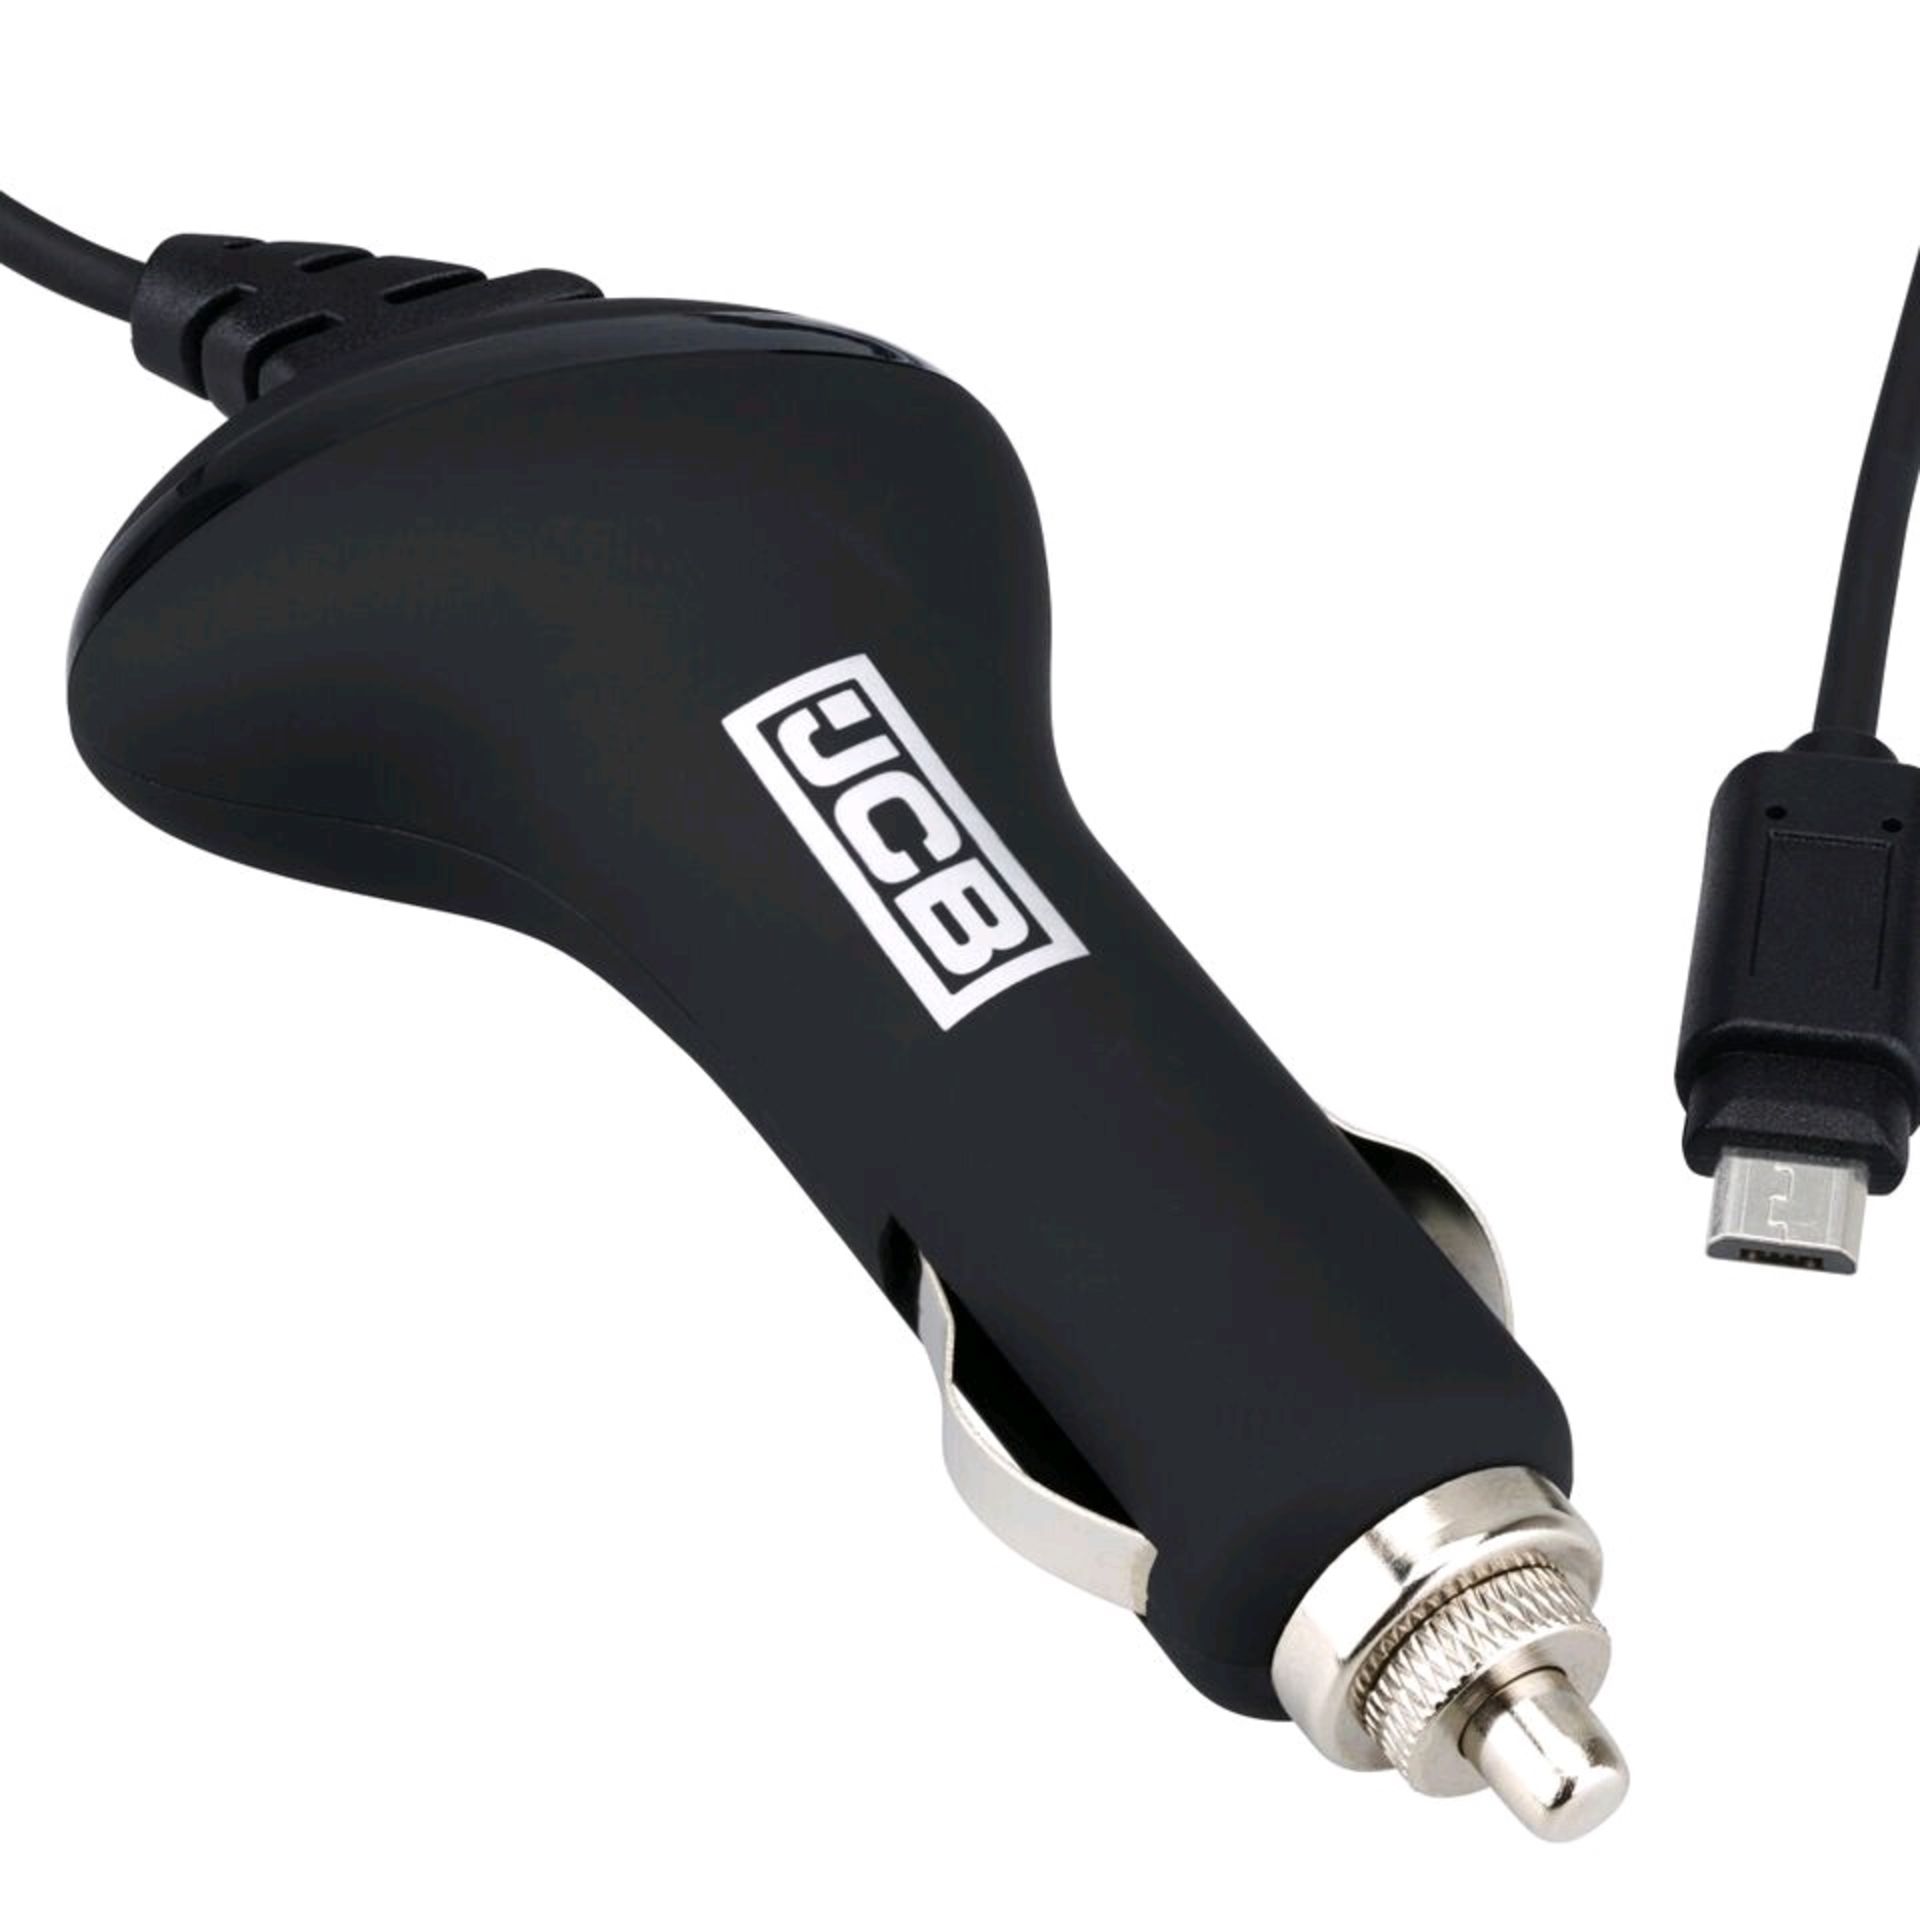 V Brand New JCB 12V Micro USB Car Charger - DC 12-24V - Micro USB Connector - 1.5M Coiled Cable -